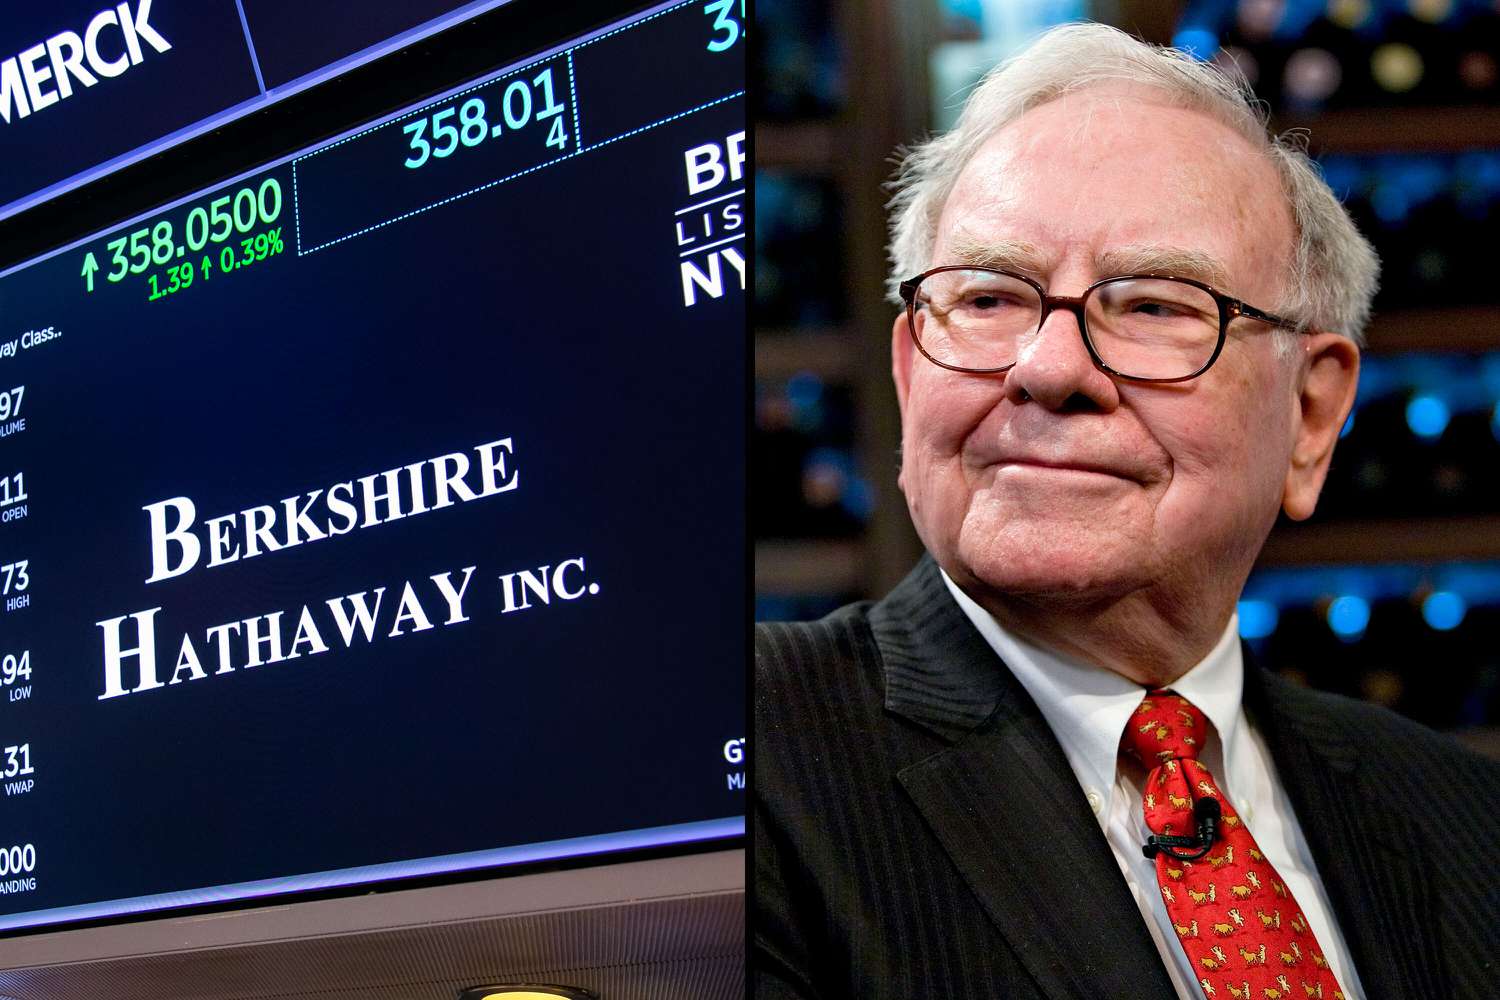 Warren Buffet Hosts Berkshire Hathaway Annual Meeting Saturday—What You Need to Know